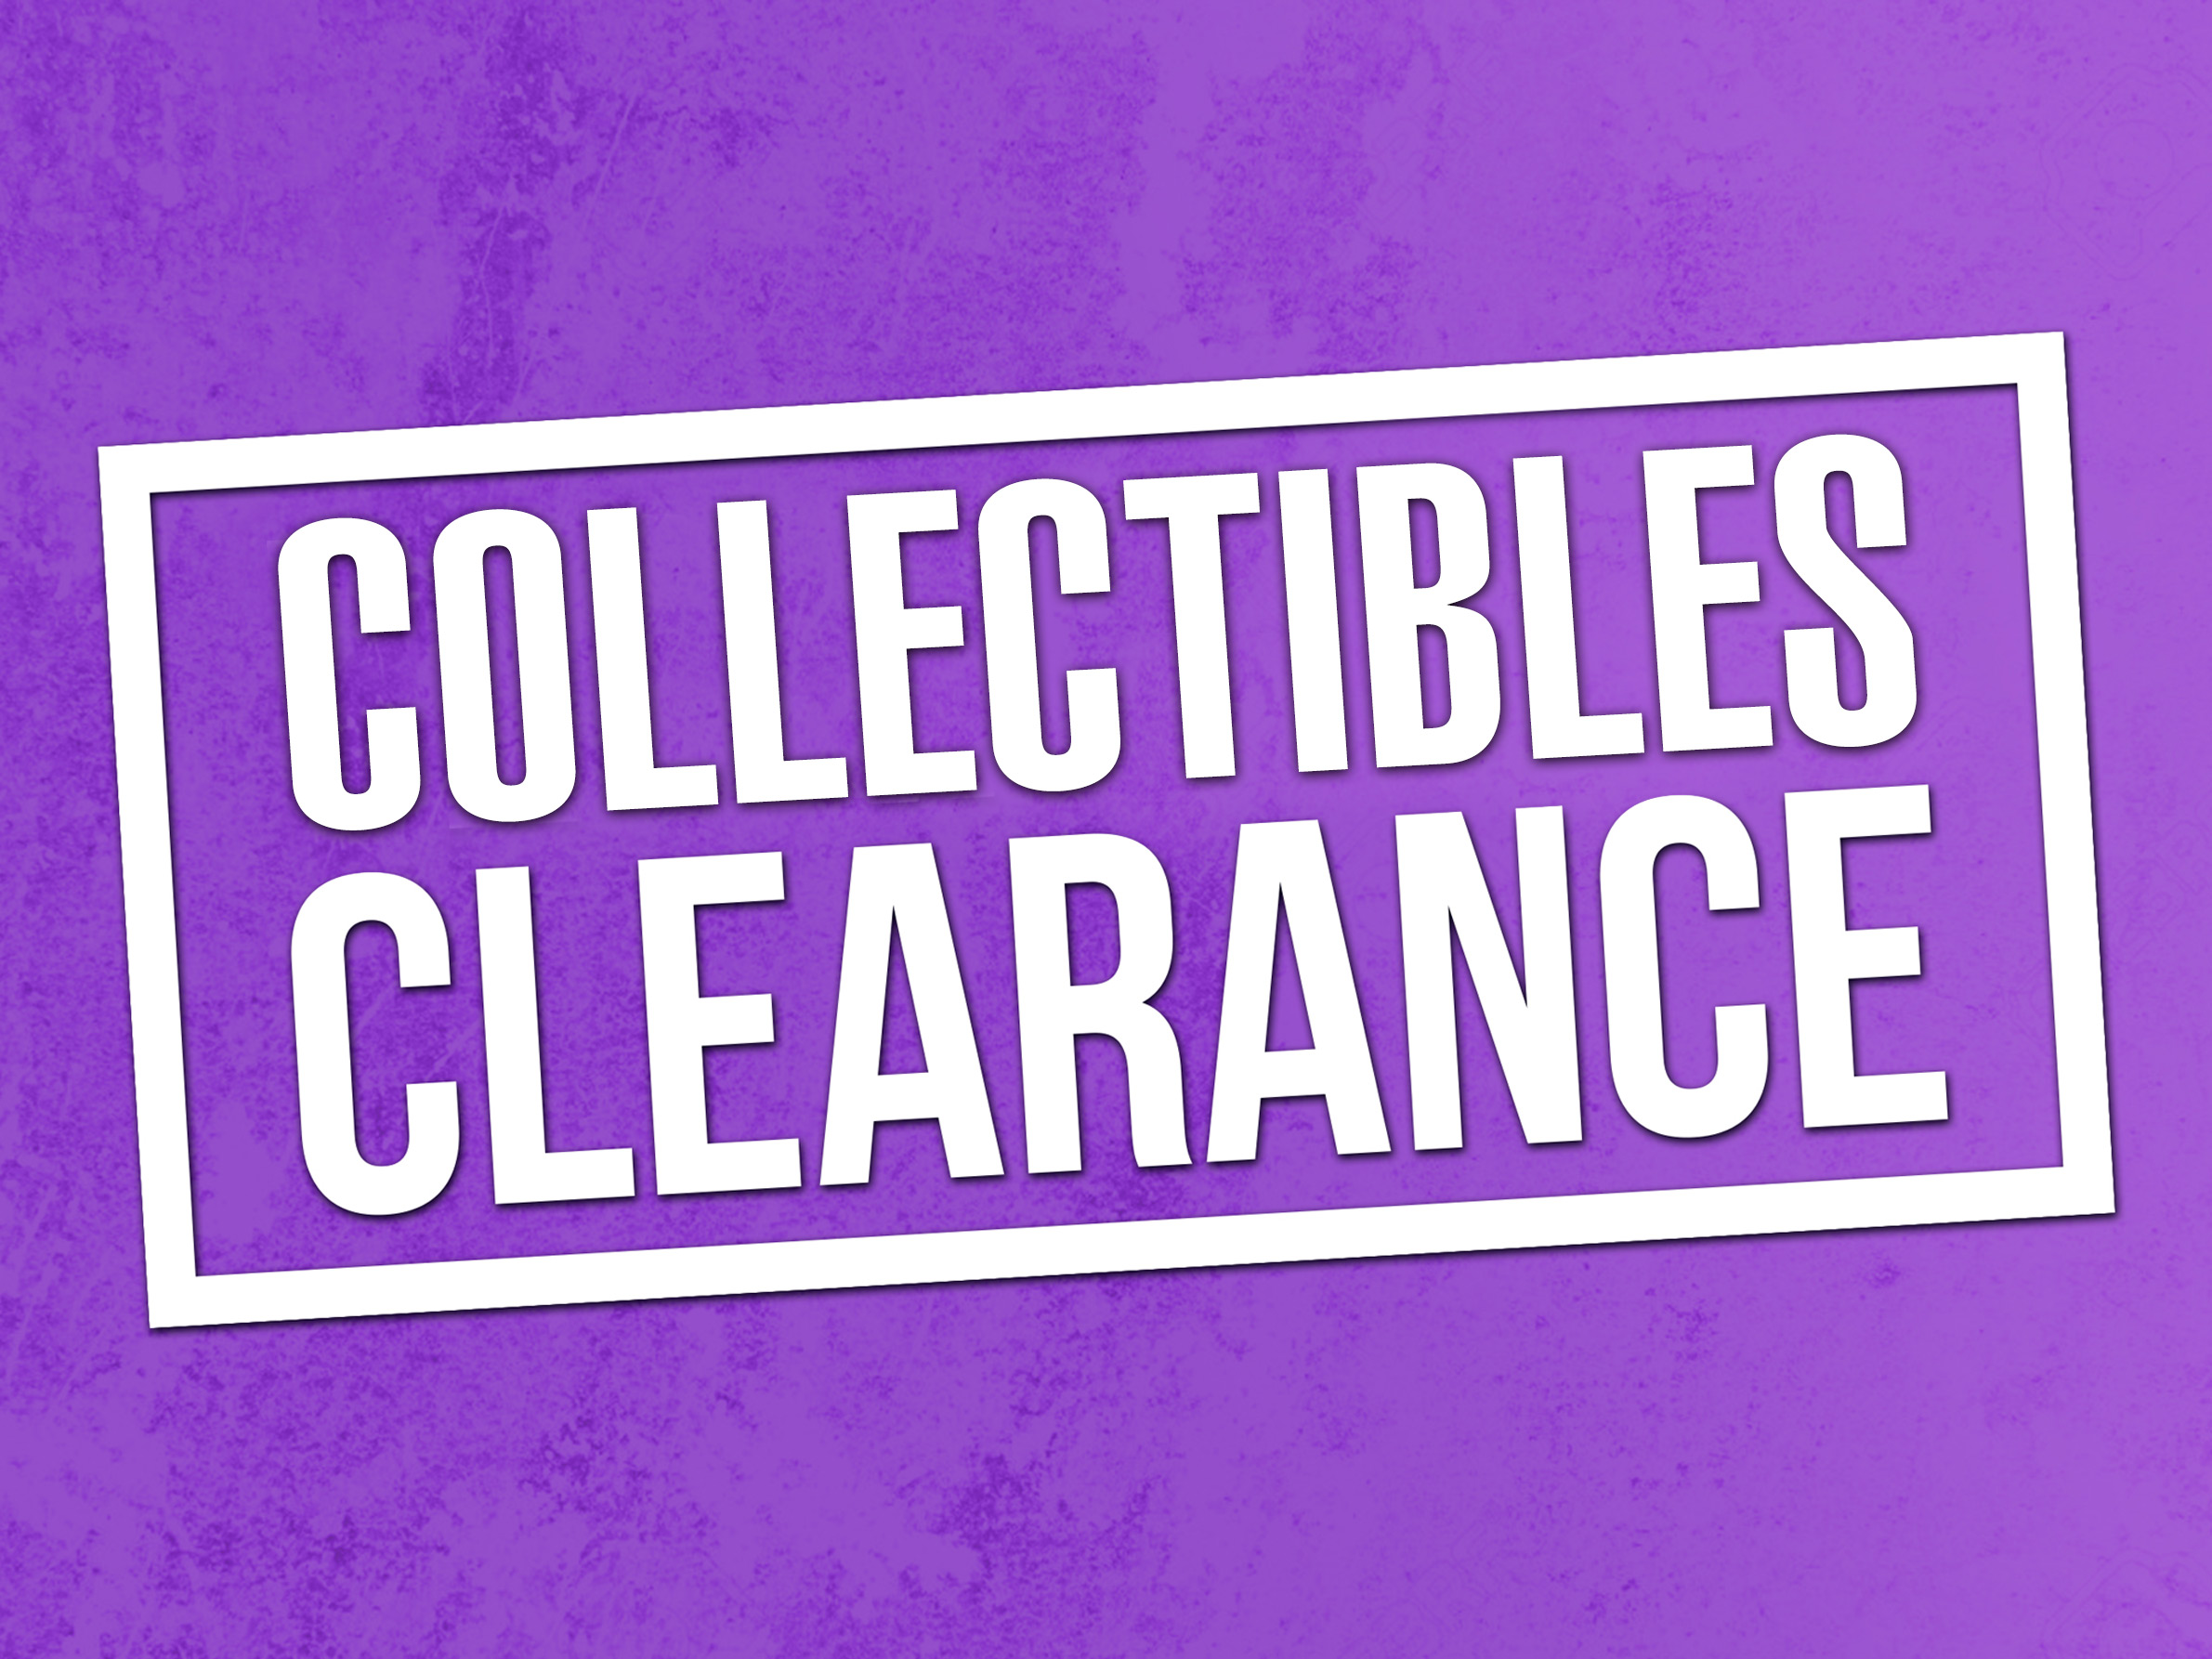 Collectibles Clearance